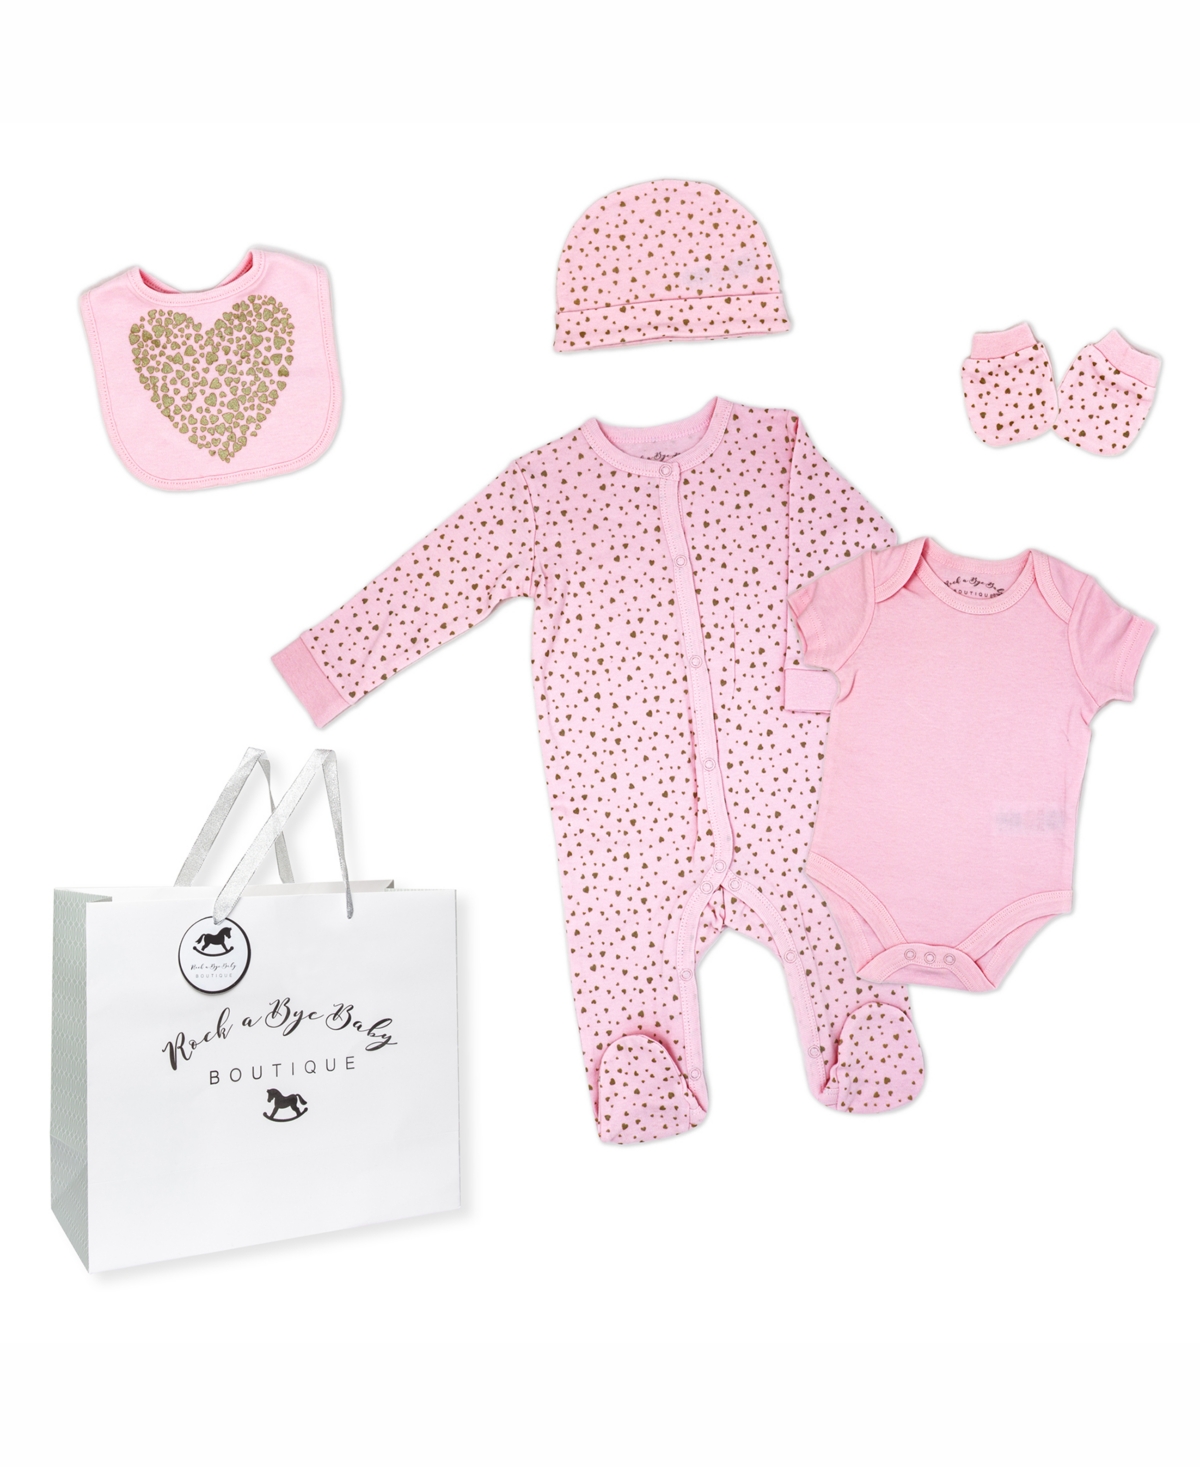 Rock-a-bye Baby Boutique Baby Girls Layette Gift Bag Set In Hearts